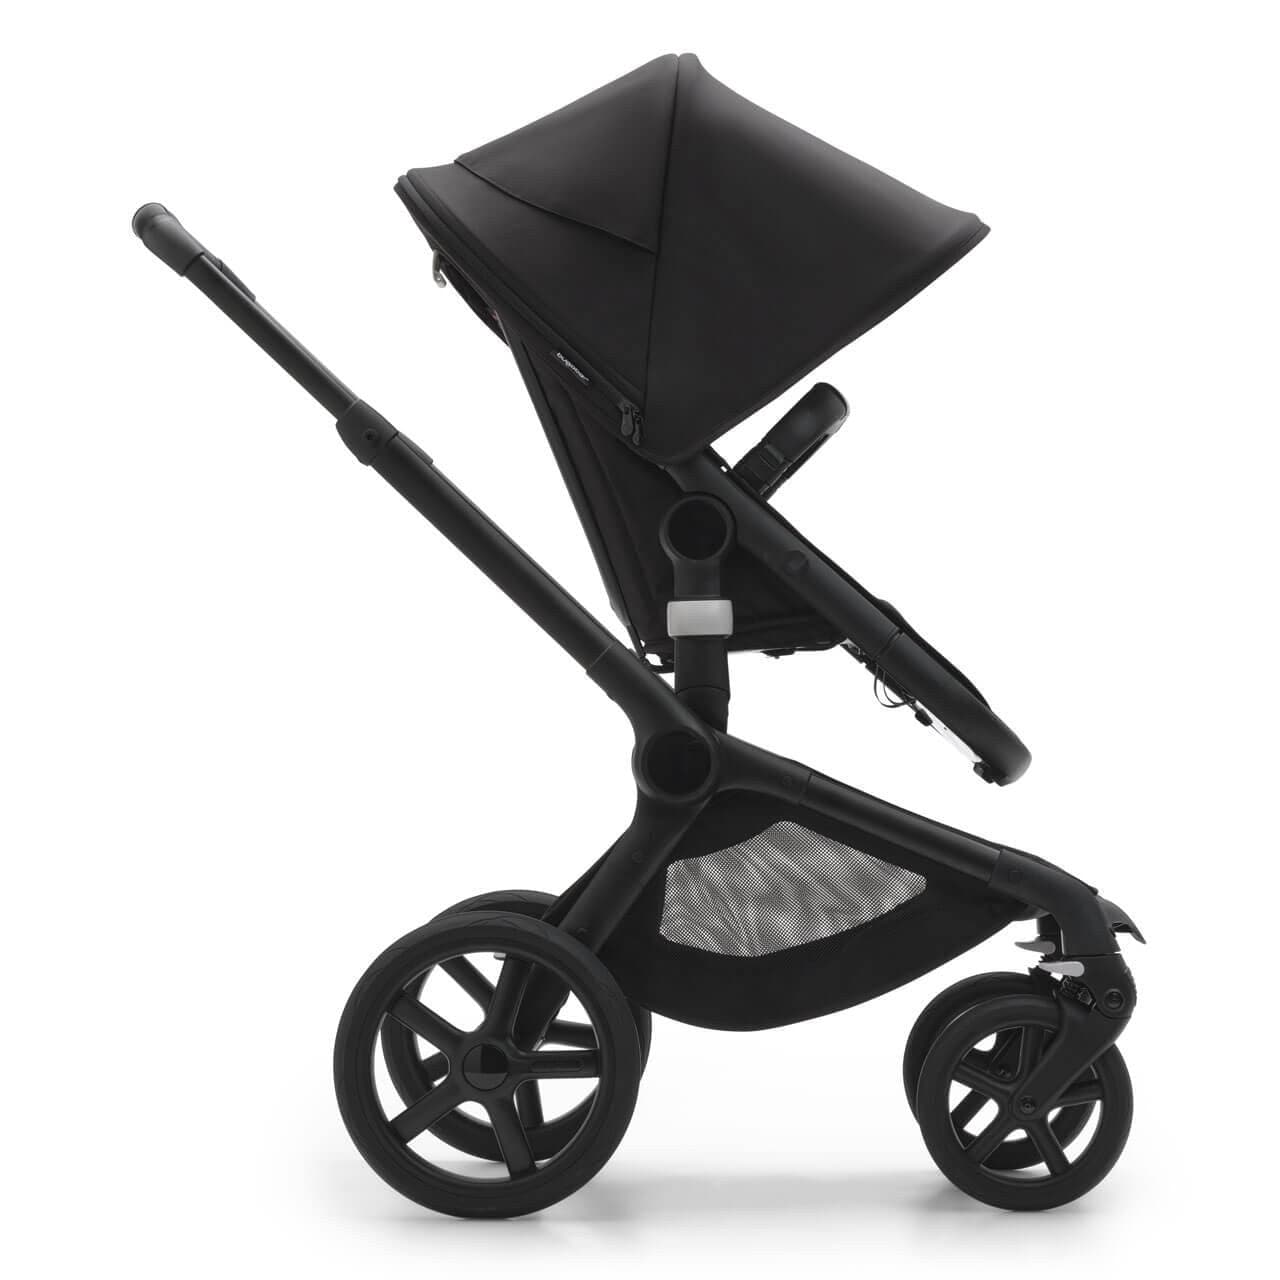 Bugaboo Fox 5 Ultimate Travel System Bundle - Black/Midnight Black - For Your Little One